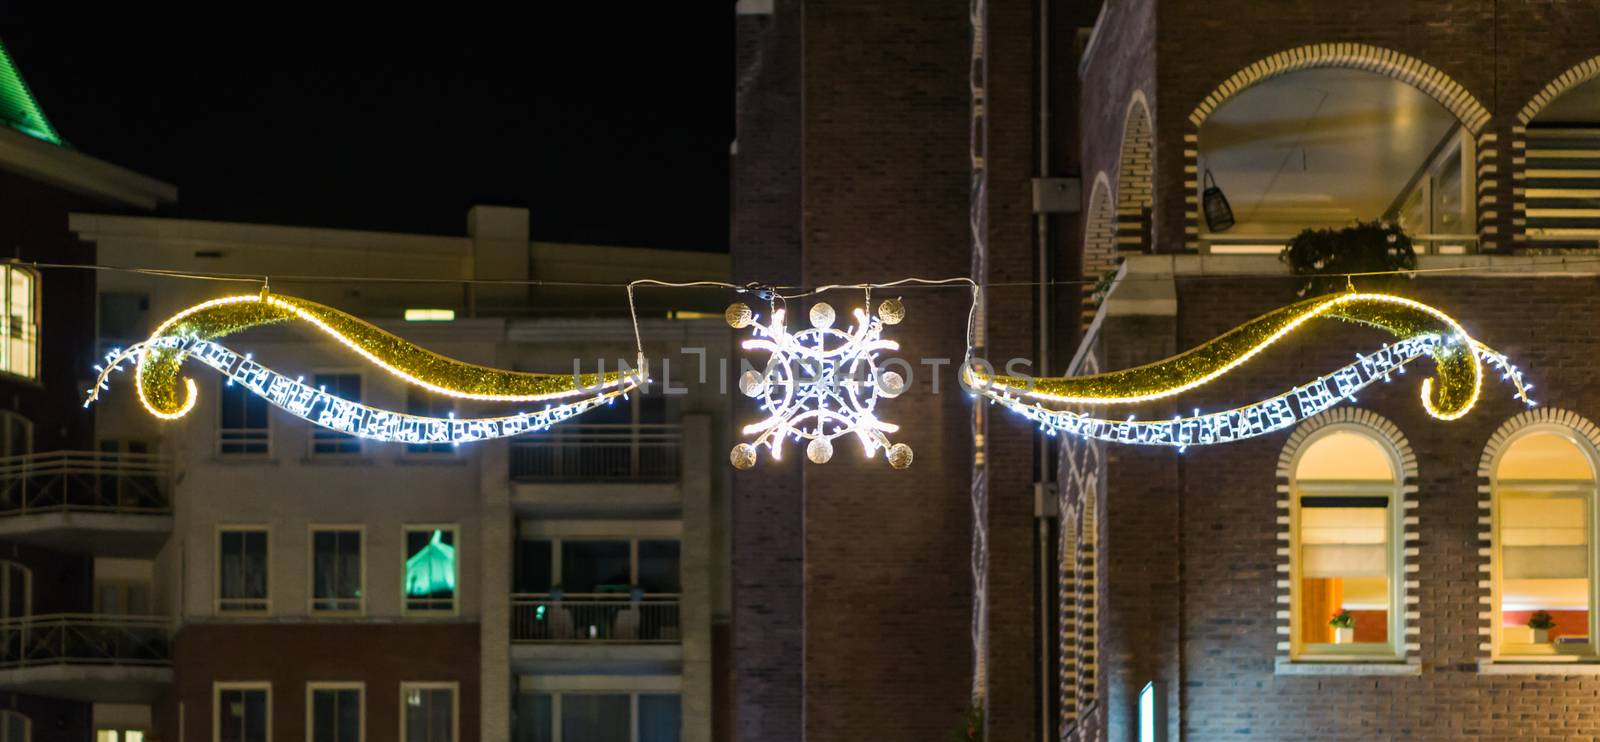 Beautiful christmas decoration with lights hanging between some buildings in the city streets at night time